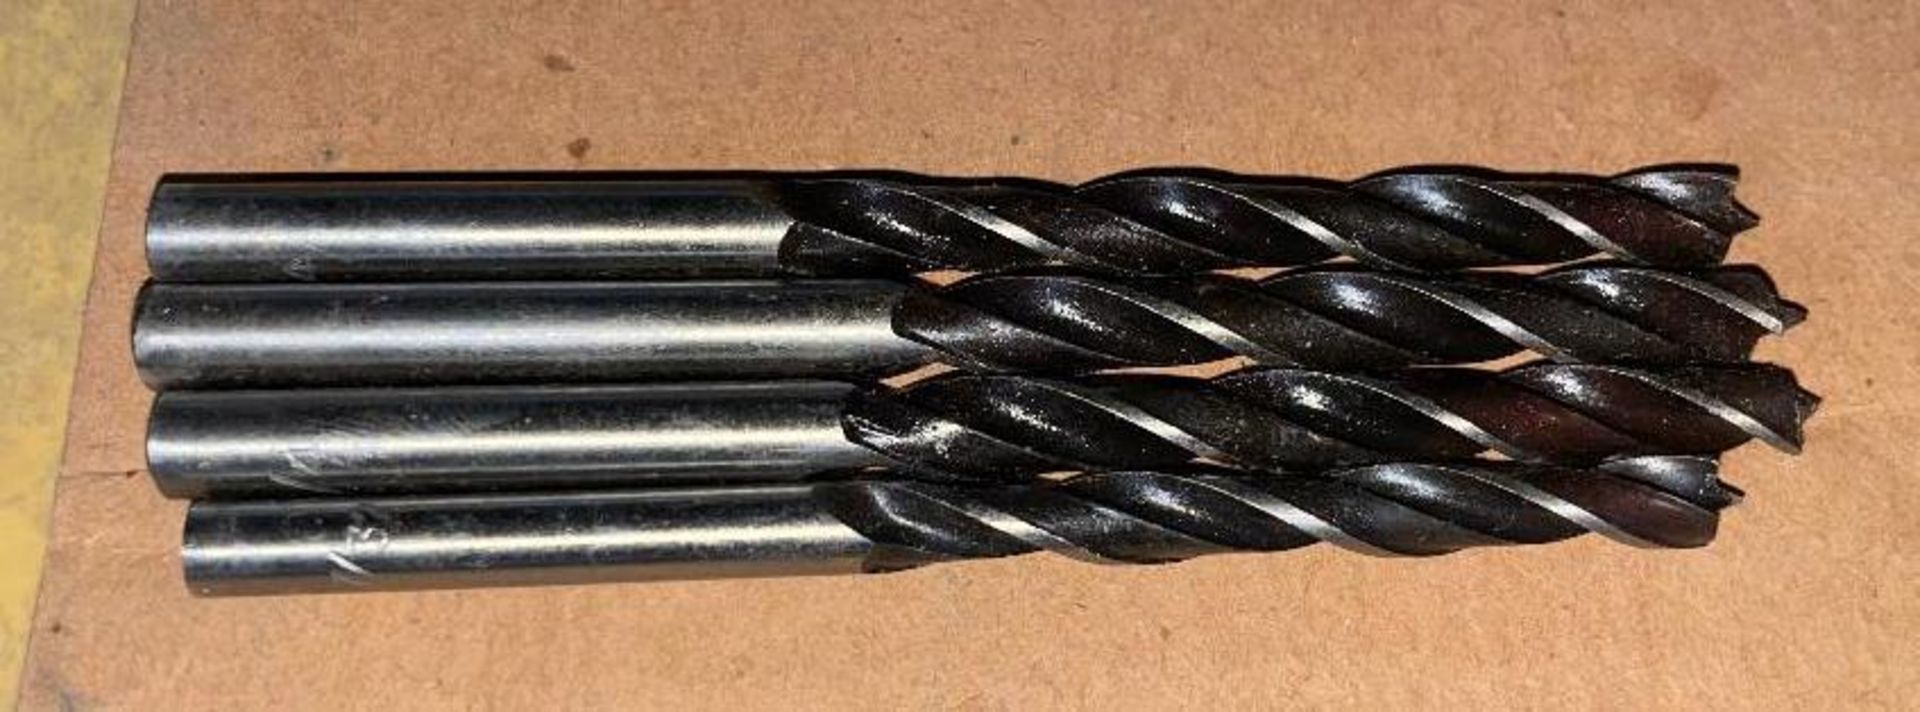 (4) CASES OF 7/8" BRAD POINT DRILL BITS. 140 PER CASE. ADDITIONAL INFORMATION 560 TOTAL IN LOT THIS